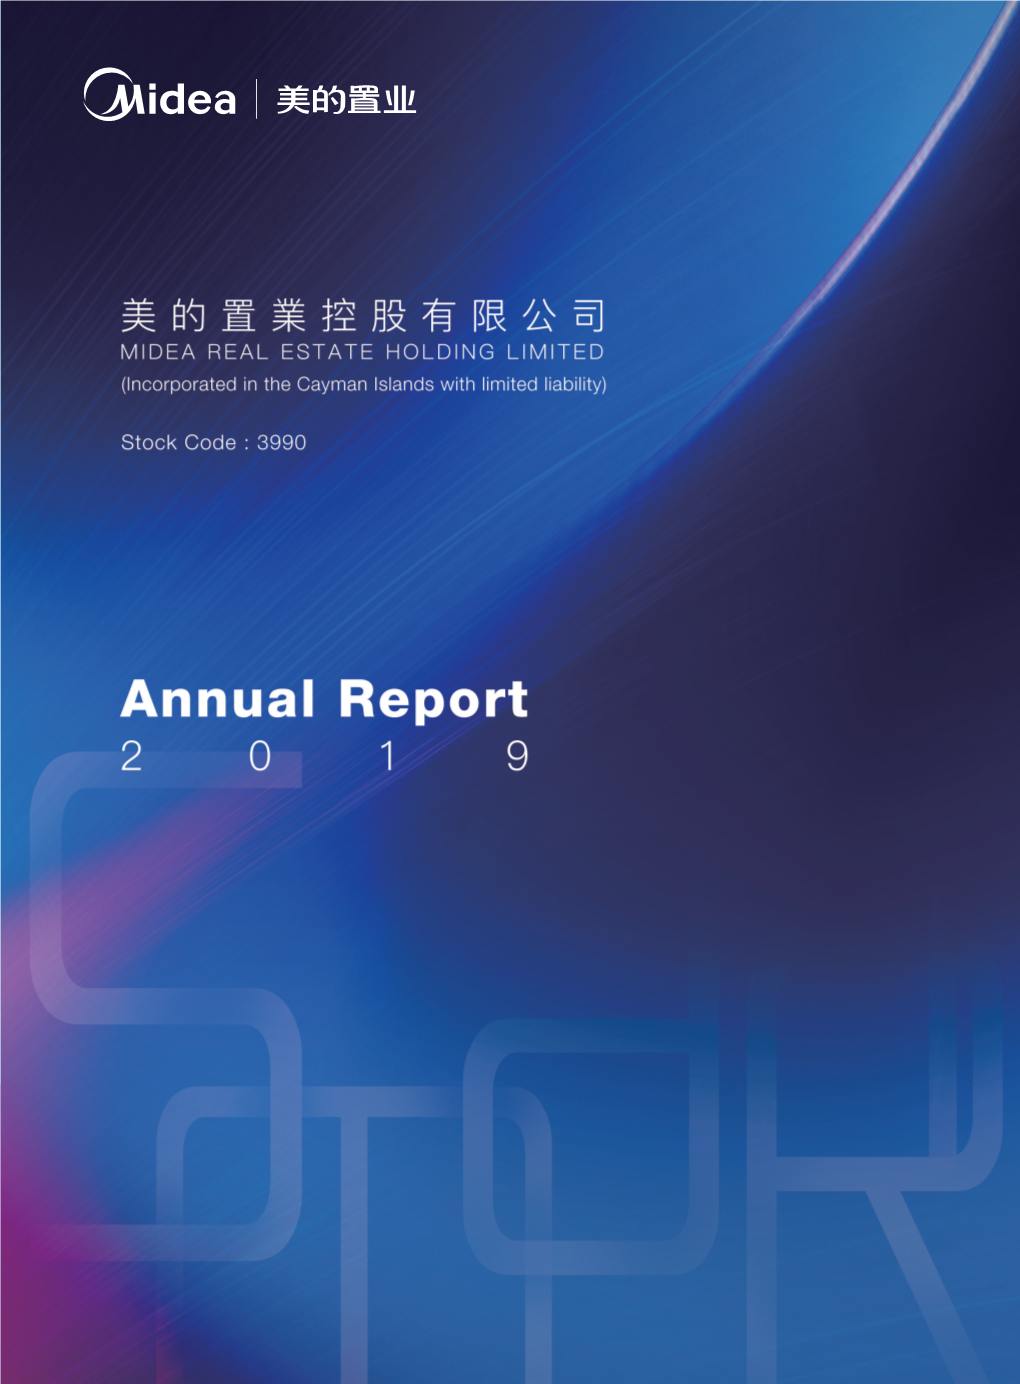 MIDEA REAL ESTATE HOLDING LIMITED 2019 Annual Report